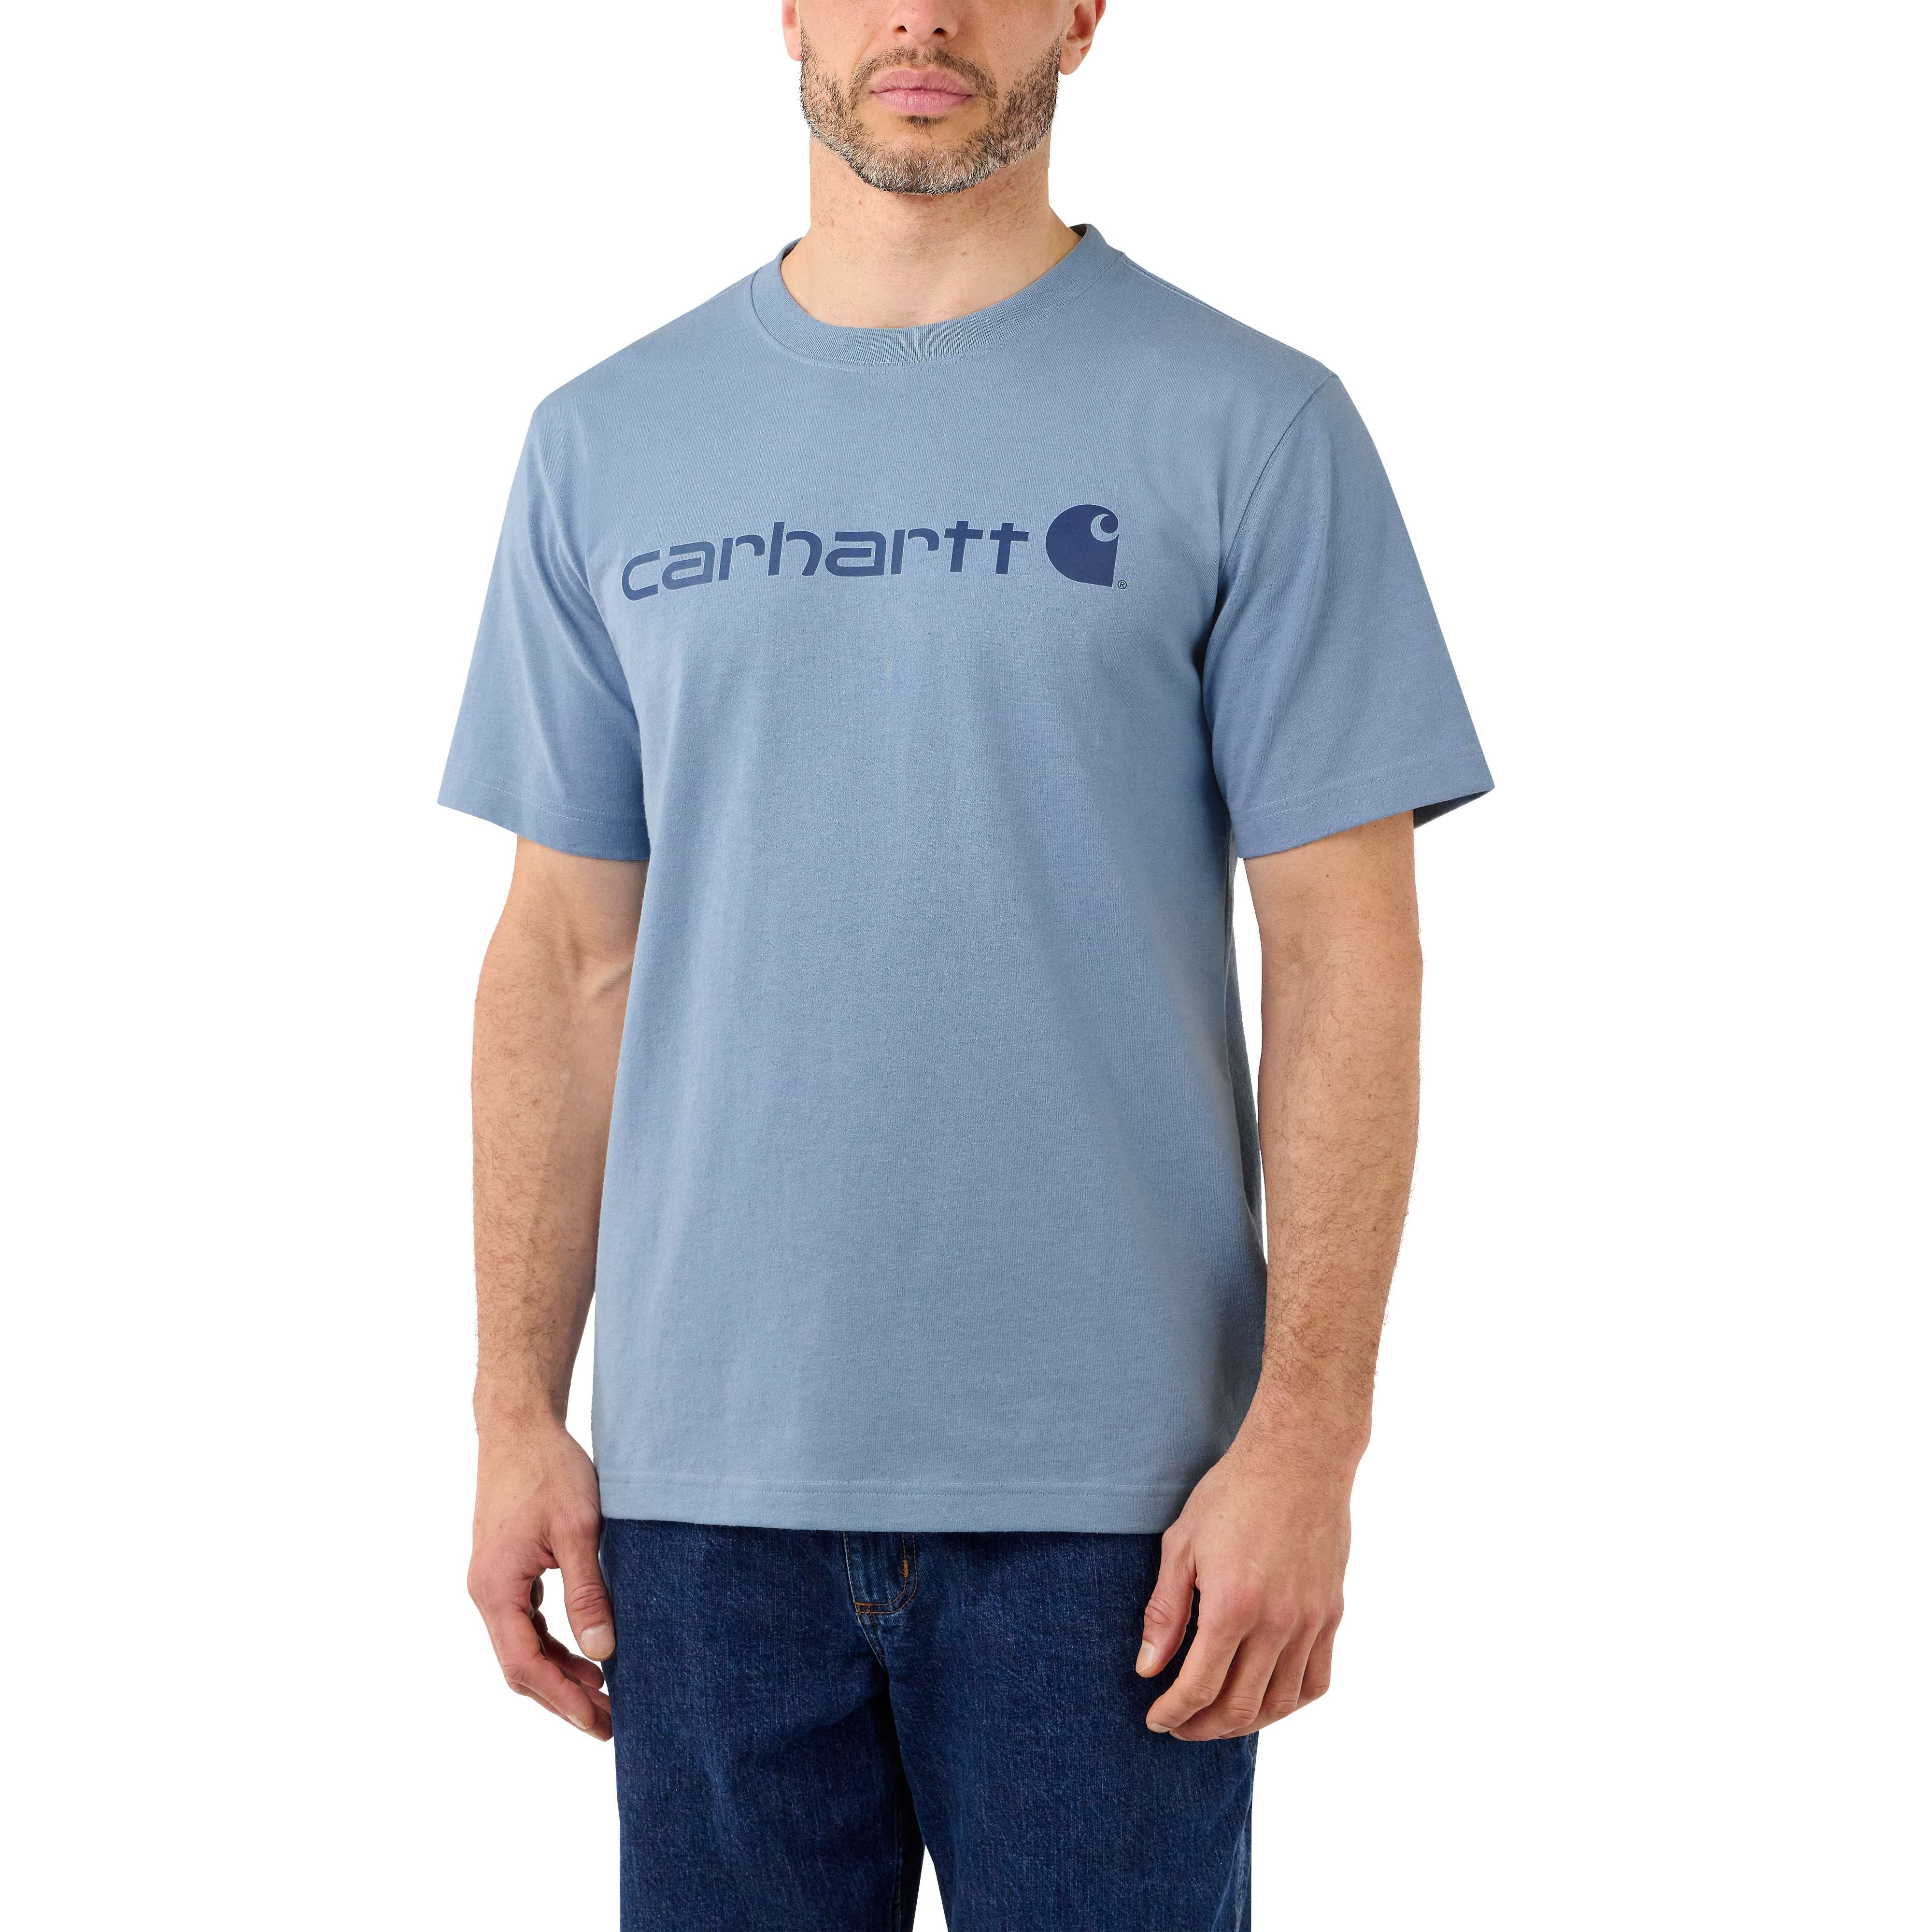 Carhartt Loose Fit vs. Relaxed Fit Shirts